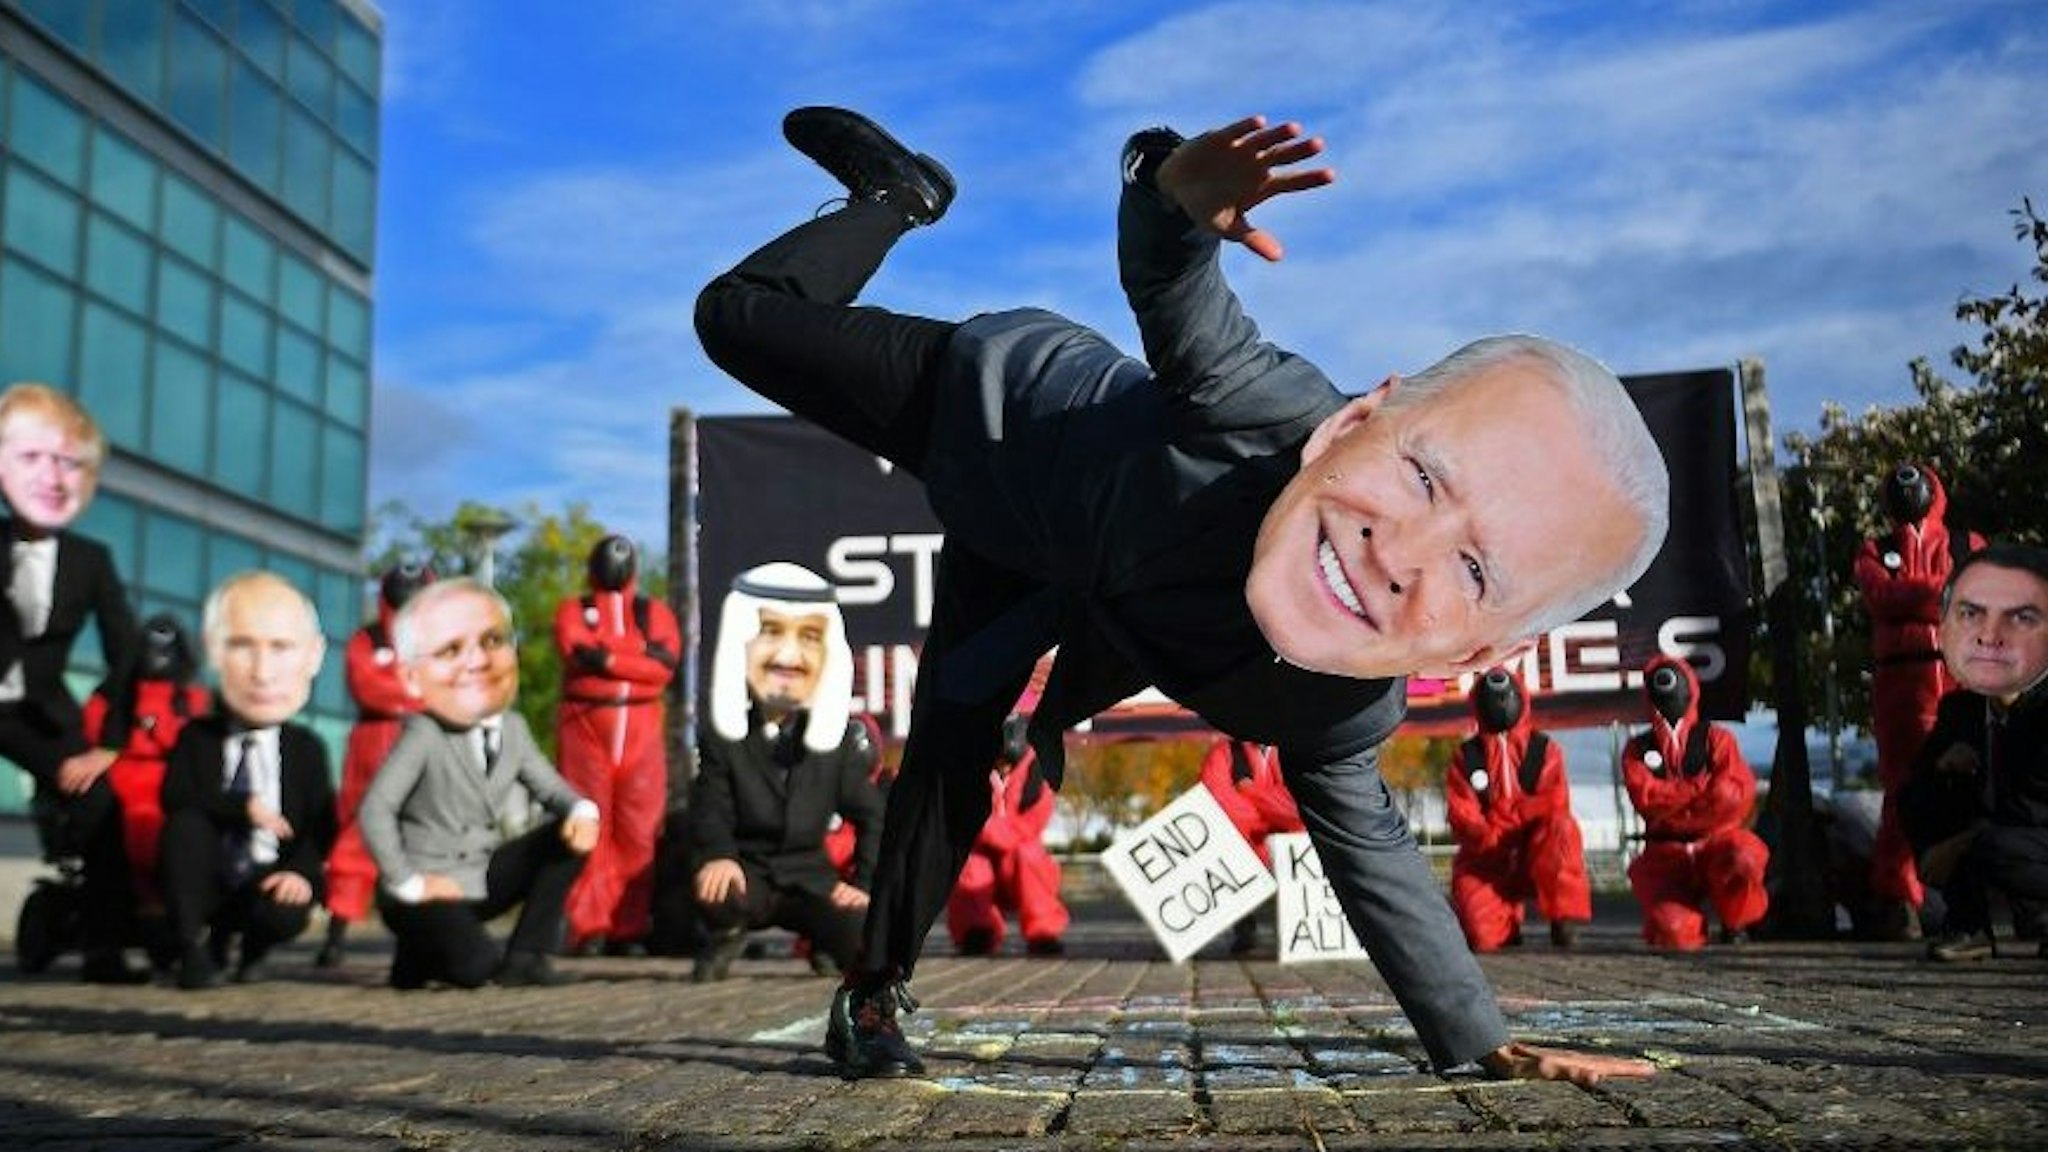 Climate change activists wearing masks depicting images of World leaders, including US President Joe Biden, take part in a "Squid Game" themed demonstration near the Scottish Event Campus (SEC), the venue of the COP26 UN Climate Change Conference in Glasgow, Scotland on November 2, 2021. - World leaders meeting at the COP26 climate summit in Glasgow will issue a multibillion-dollar pledge to end deforestation by 2030 but that date is too distant for campaigners who want action sooner to save the planet's lungs. (Photo by ANDY BUCHANAN / AFP) (Photo by